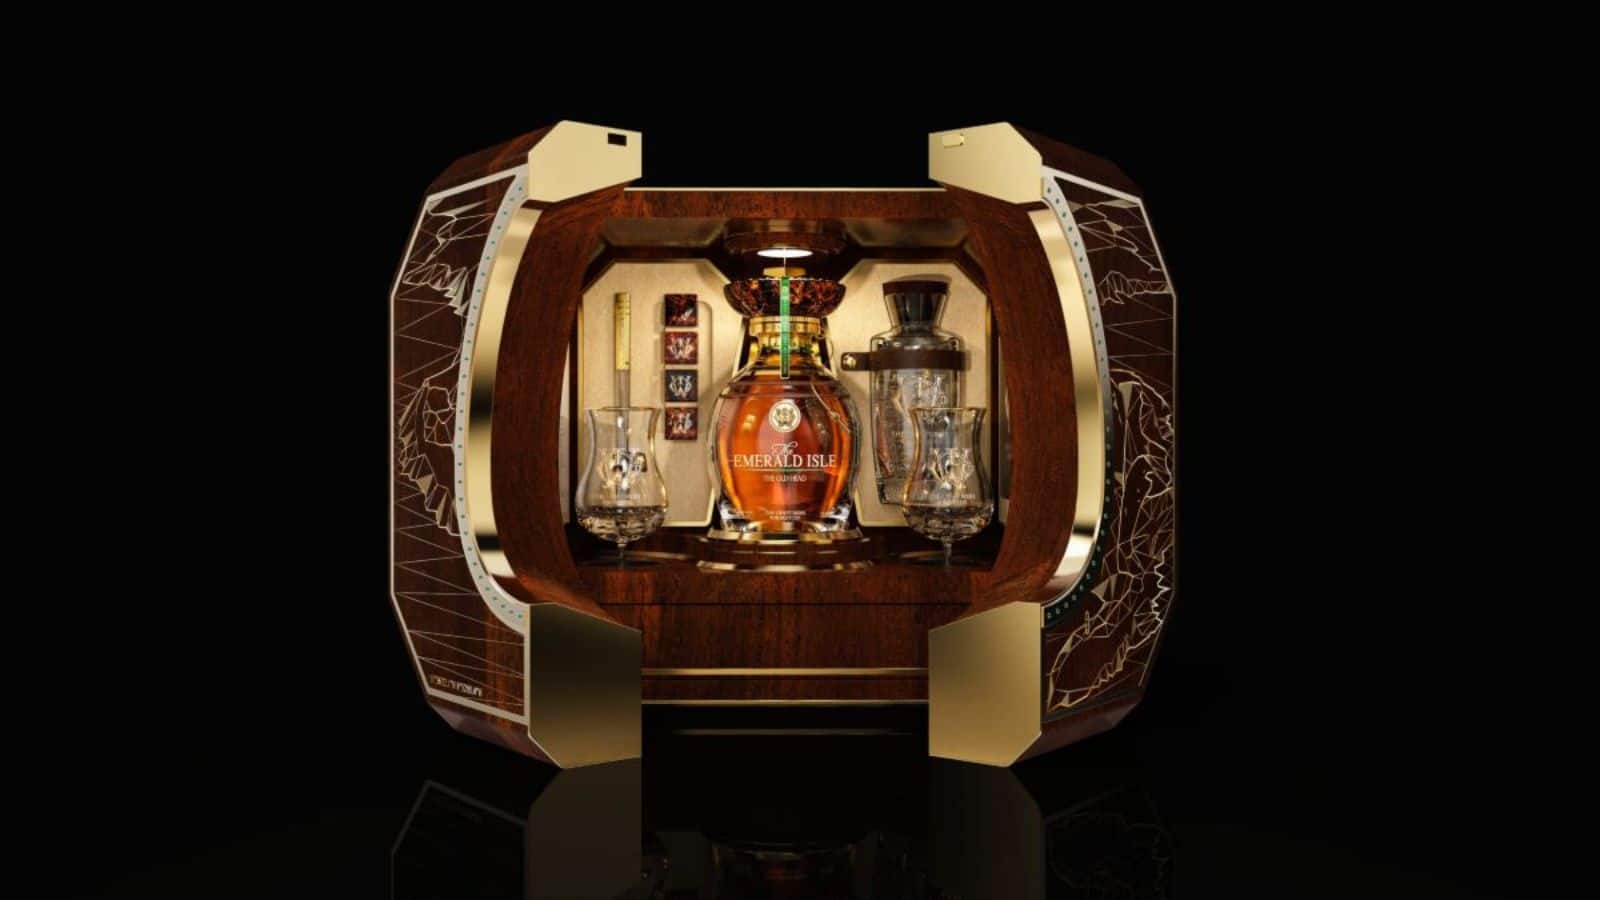 The Emerald Isle collection whiskey box